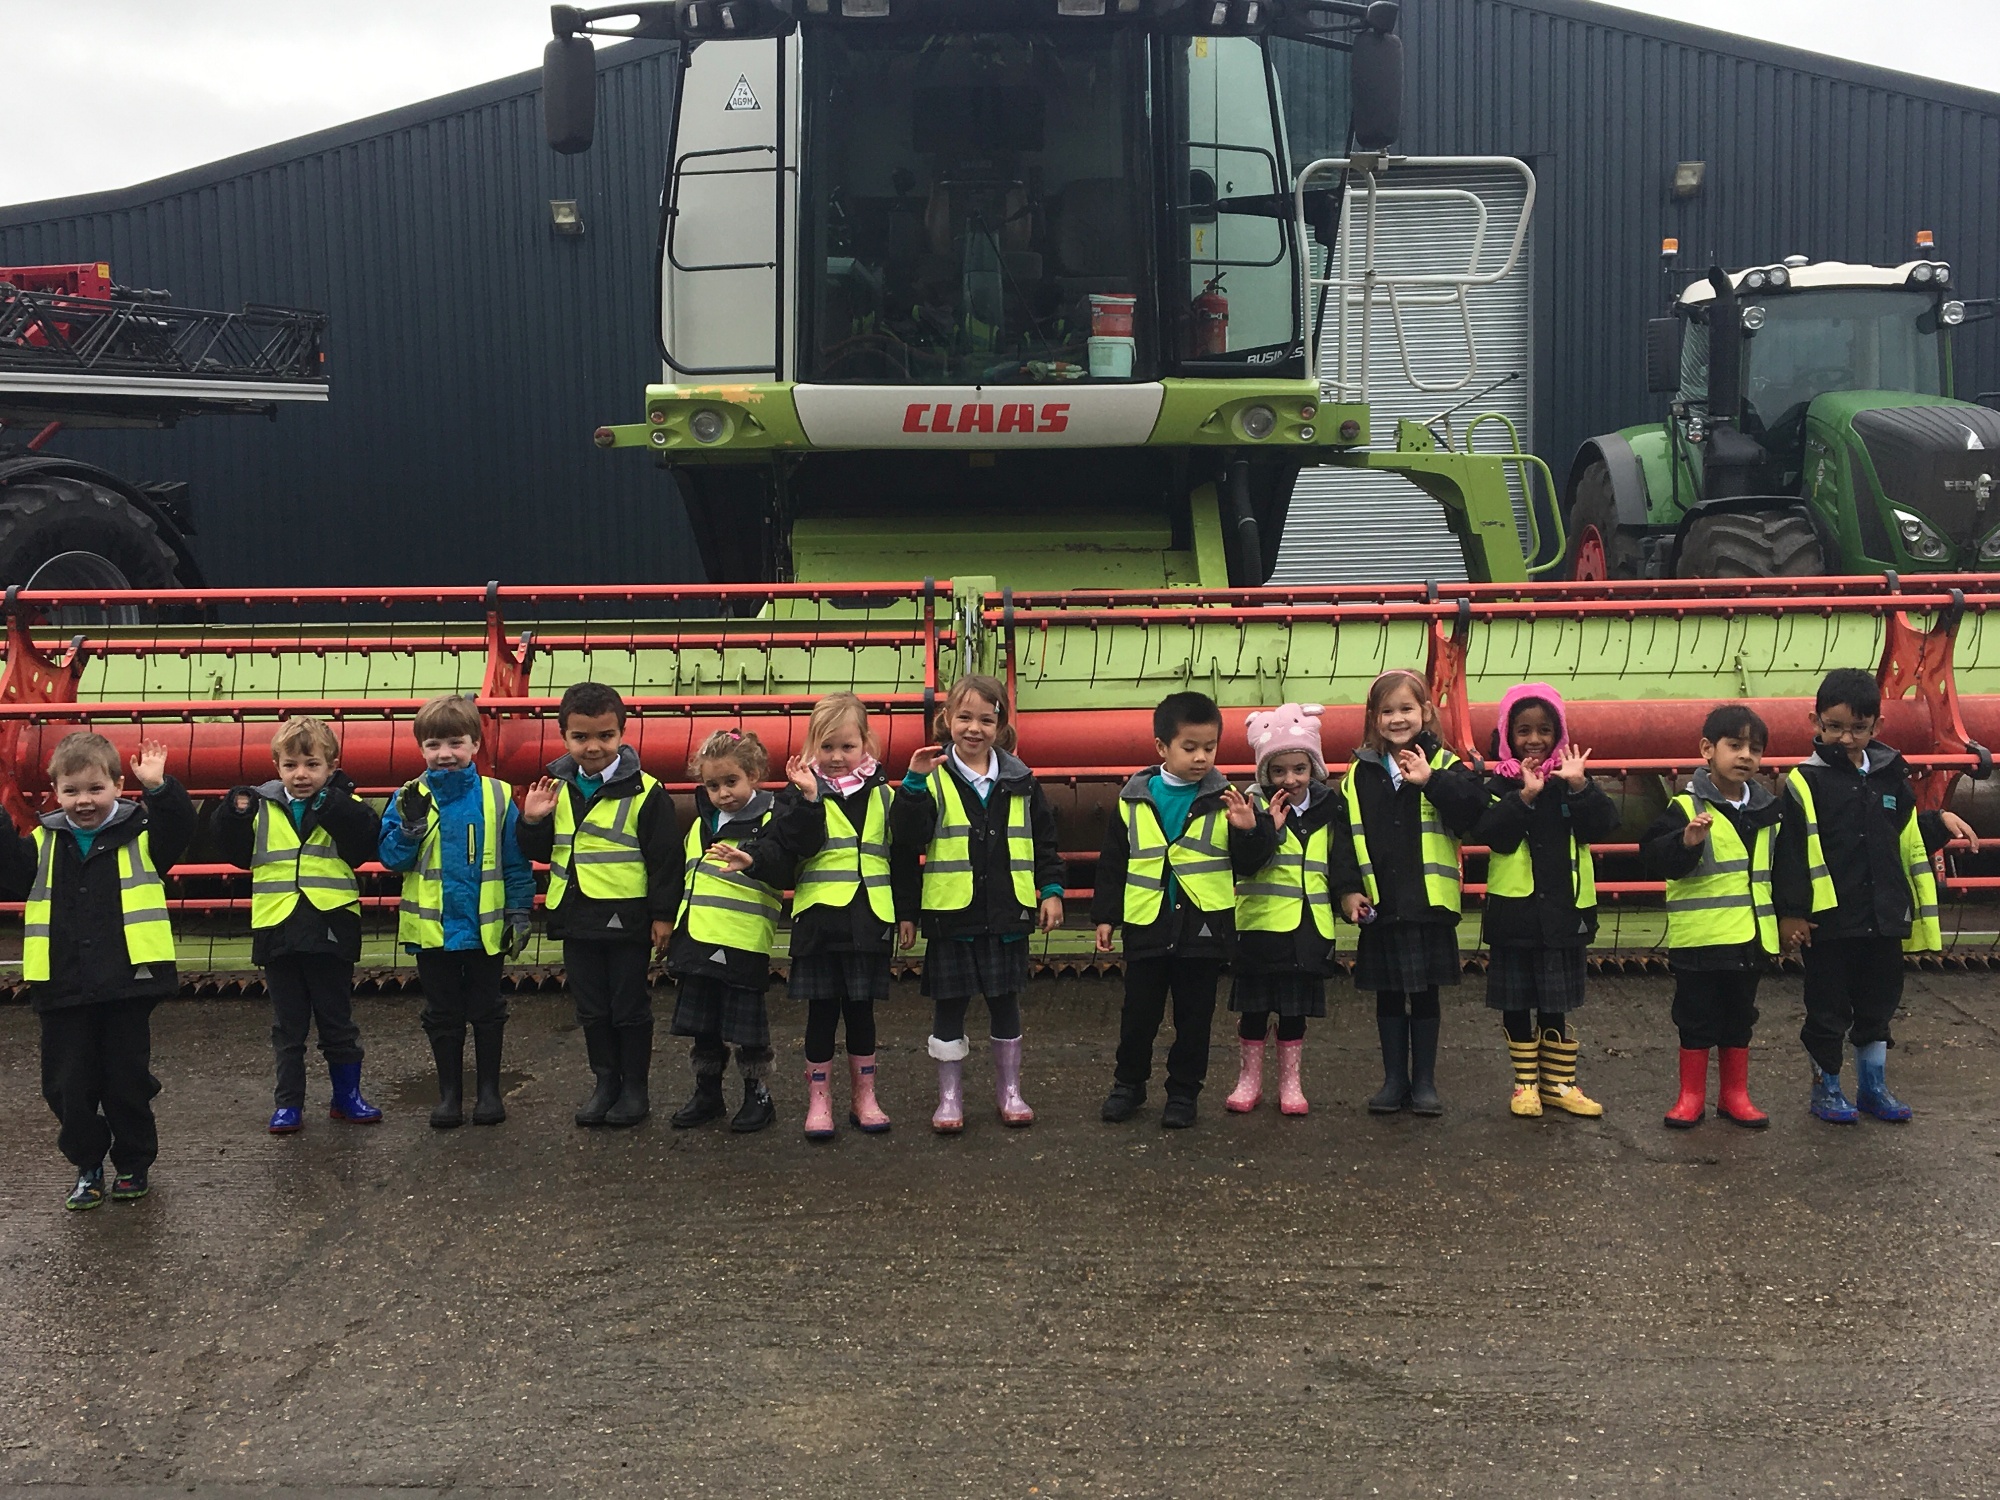 Waving in front of a  combine harvester